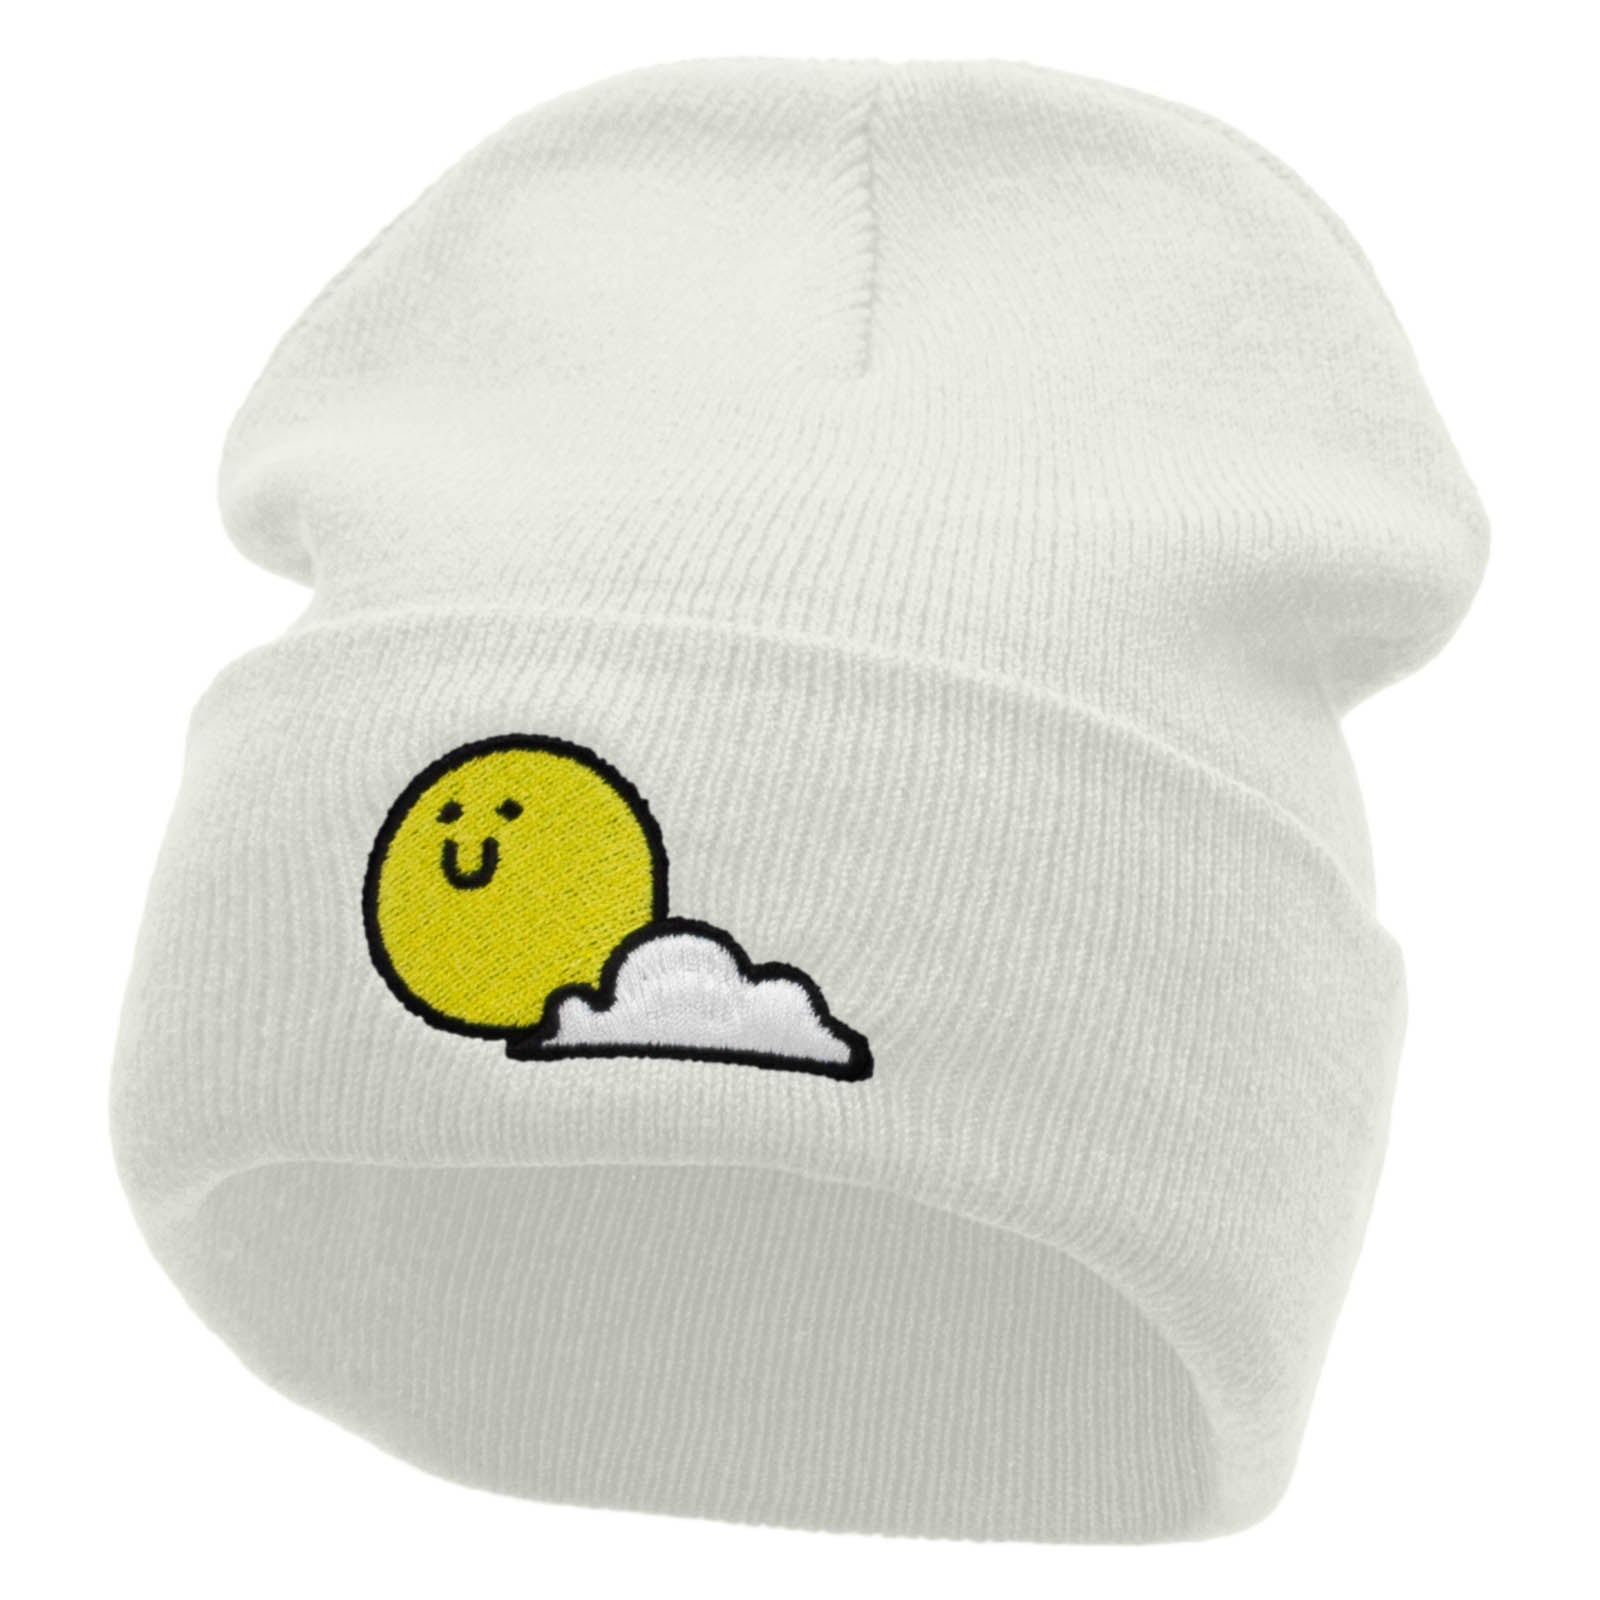 Sunny Smile Embroidered 12 Inch Long Knitted Beanie - White OSFM